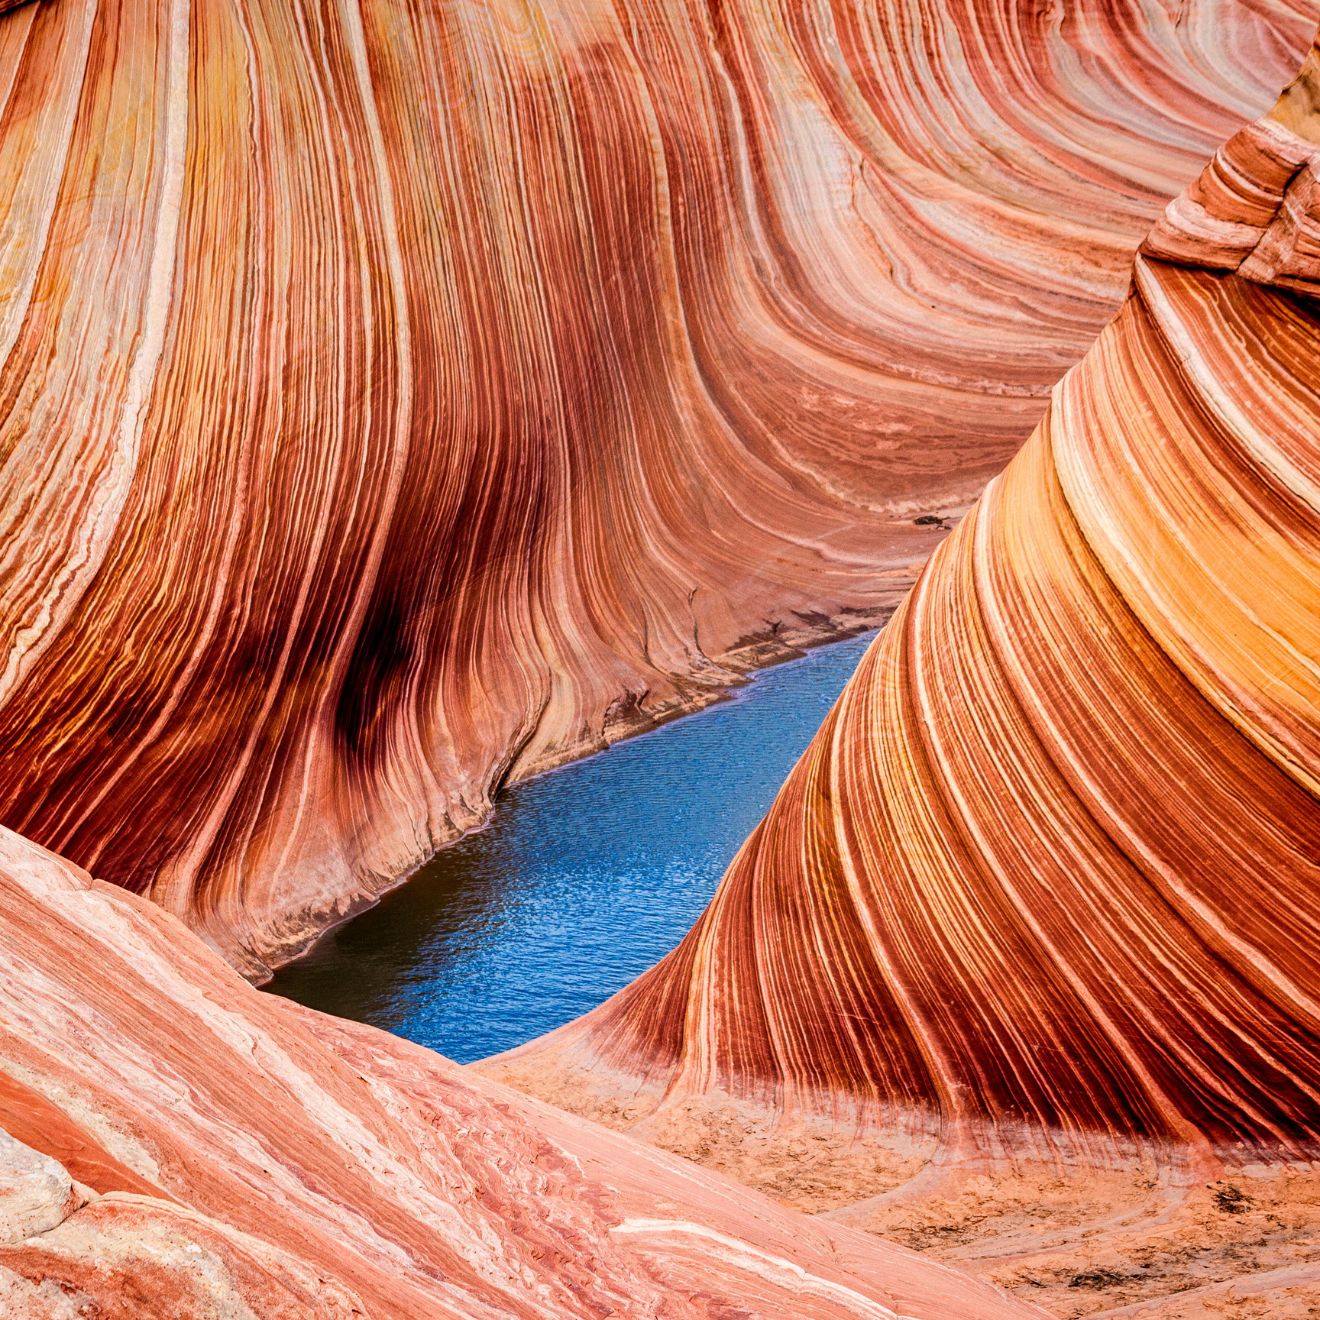 The Wave rock formation,Coyote Buttes, Paria Canyon Vermillion cliffs, Arizona, USA - Image ID: MA5FBD (RM)